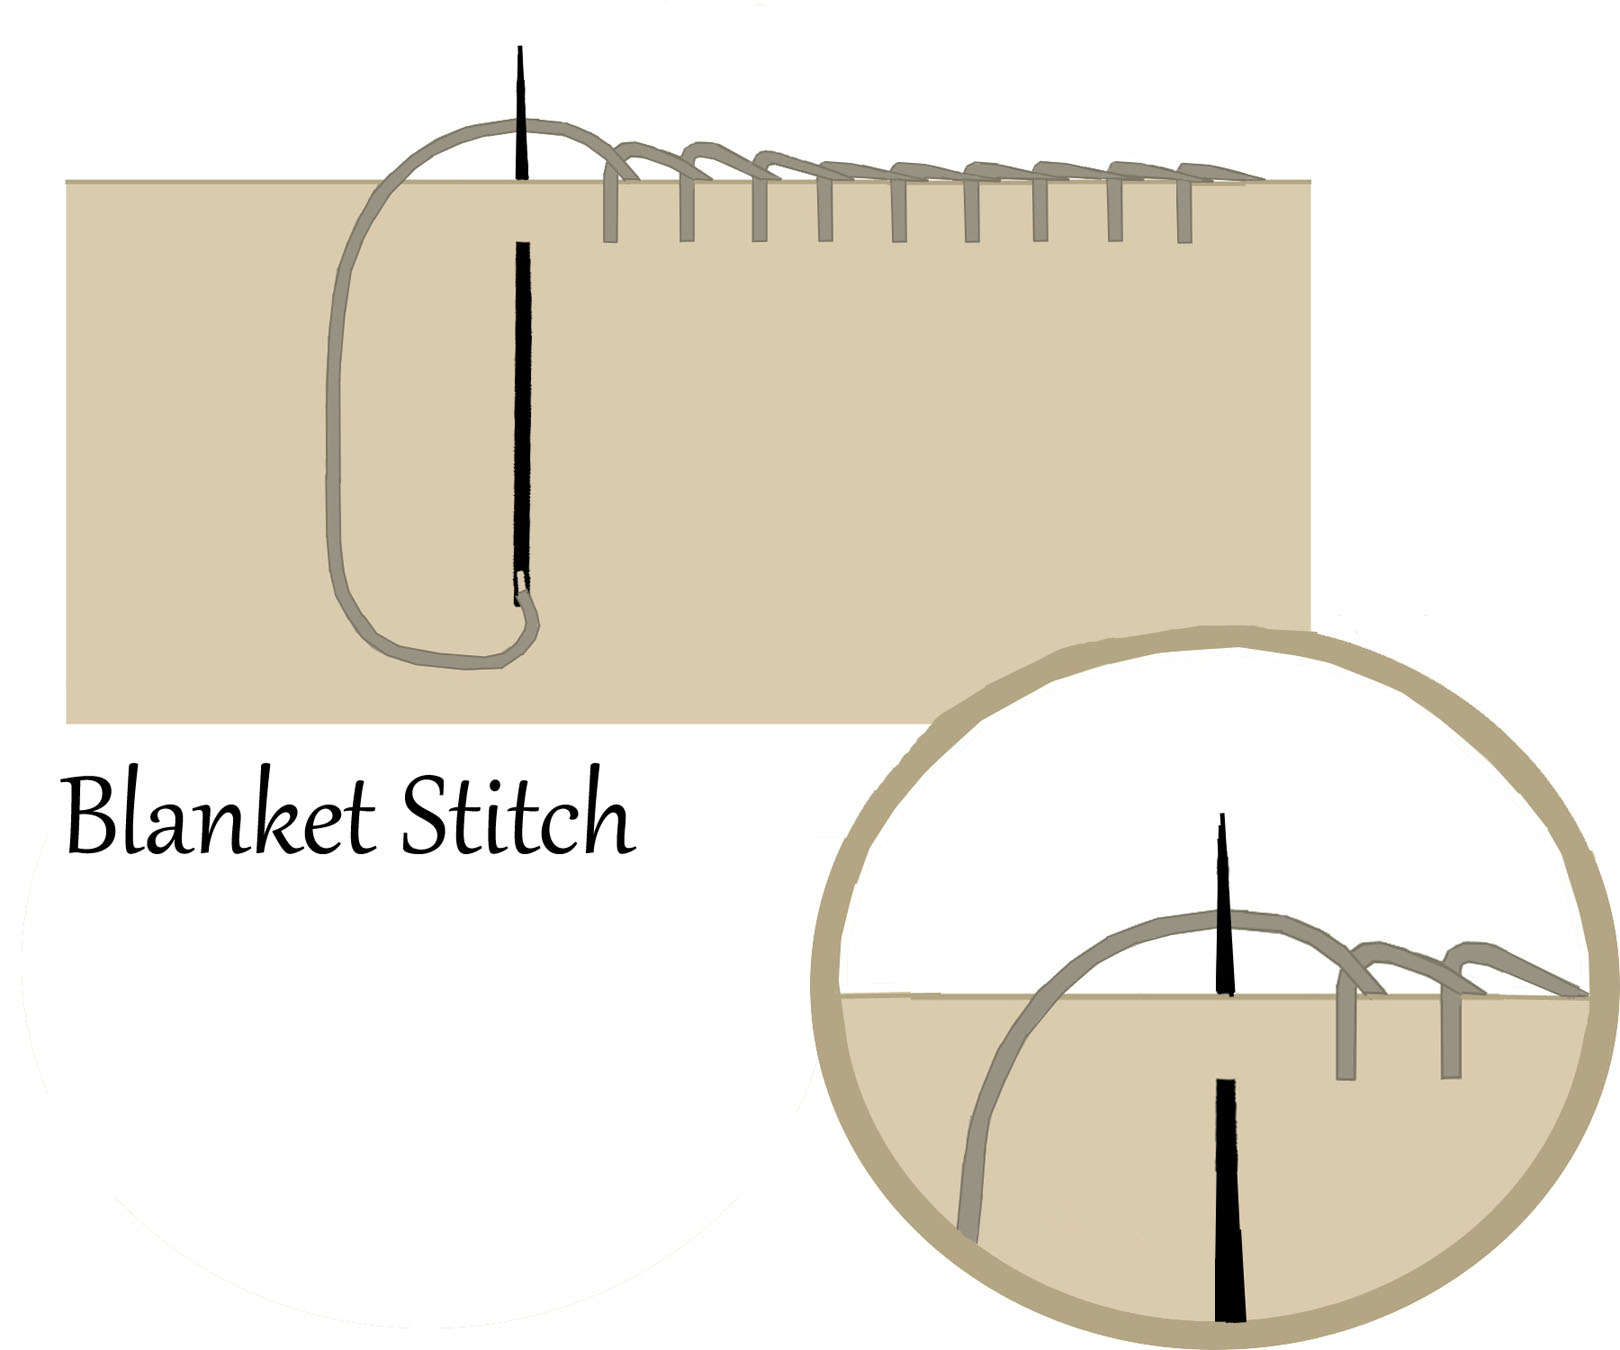 Hand Sewing: The Basic Stitches